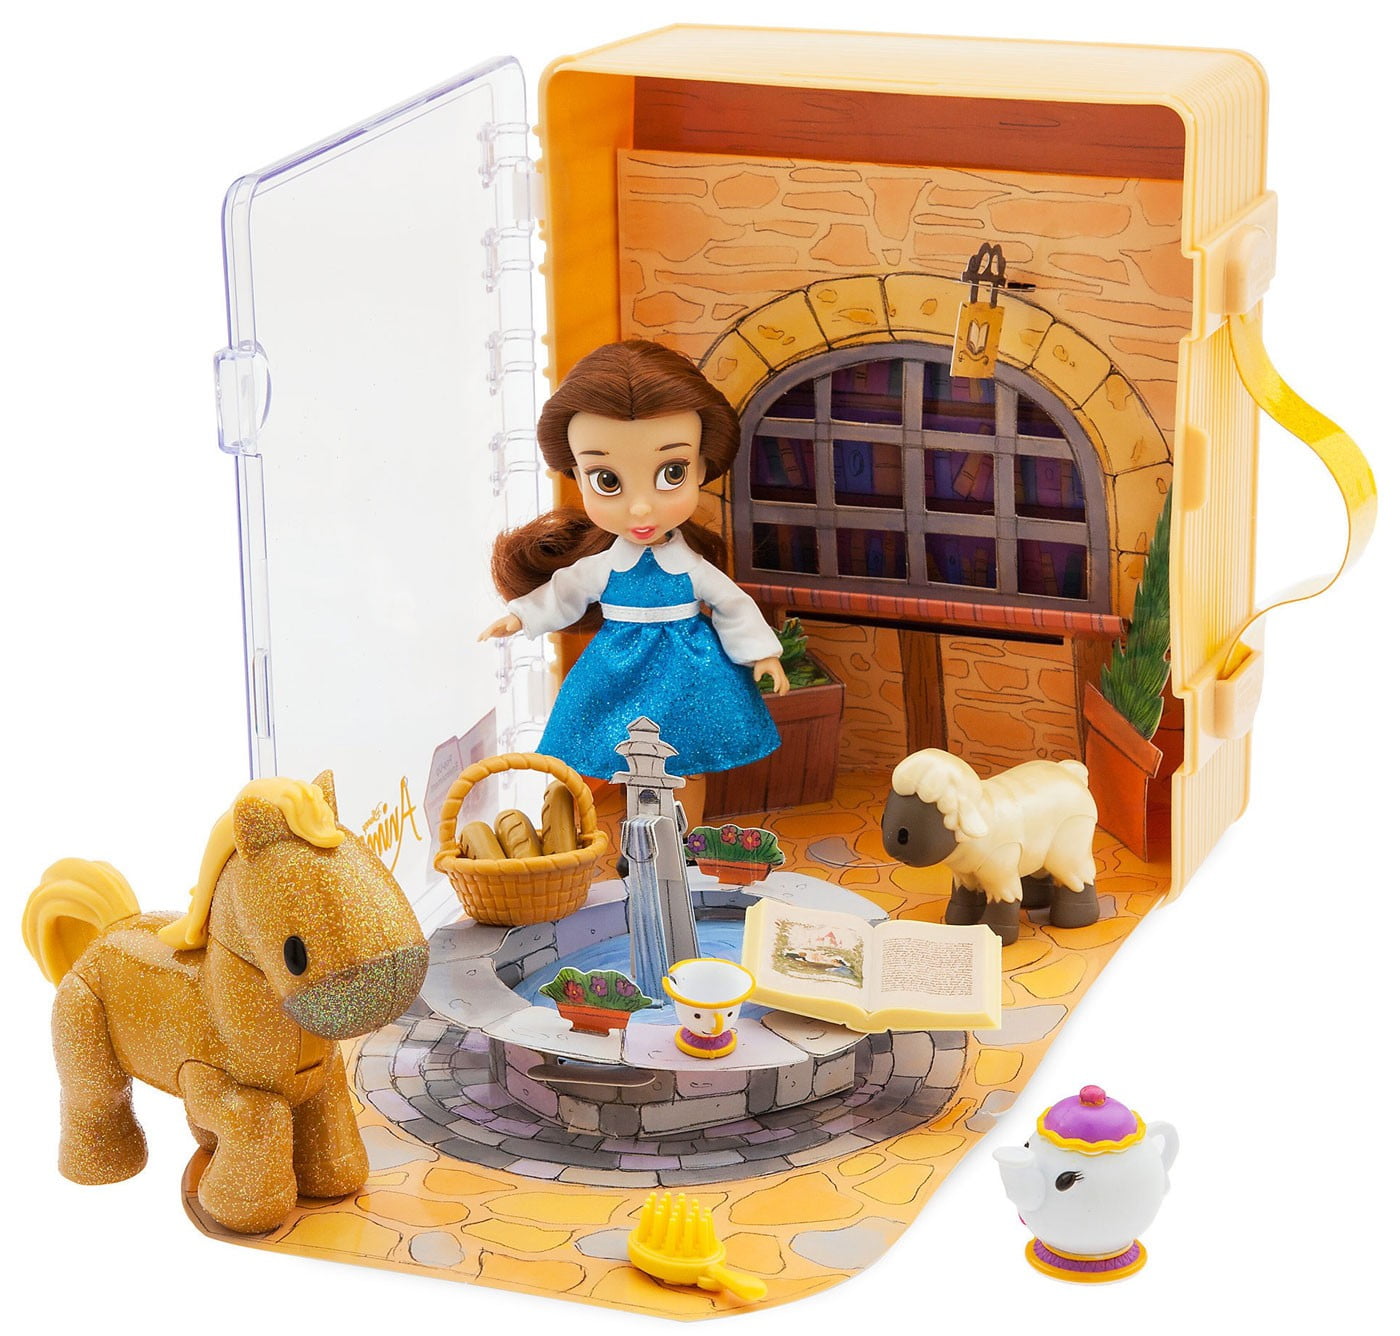 Disney Animators' Collection Belle Mini Doll Play Set 5 Inch 460703383761 for sale online